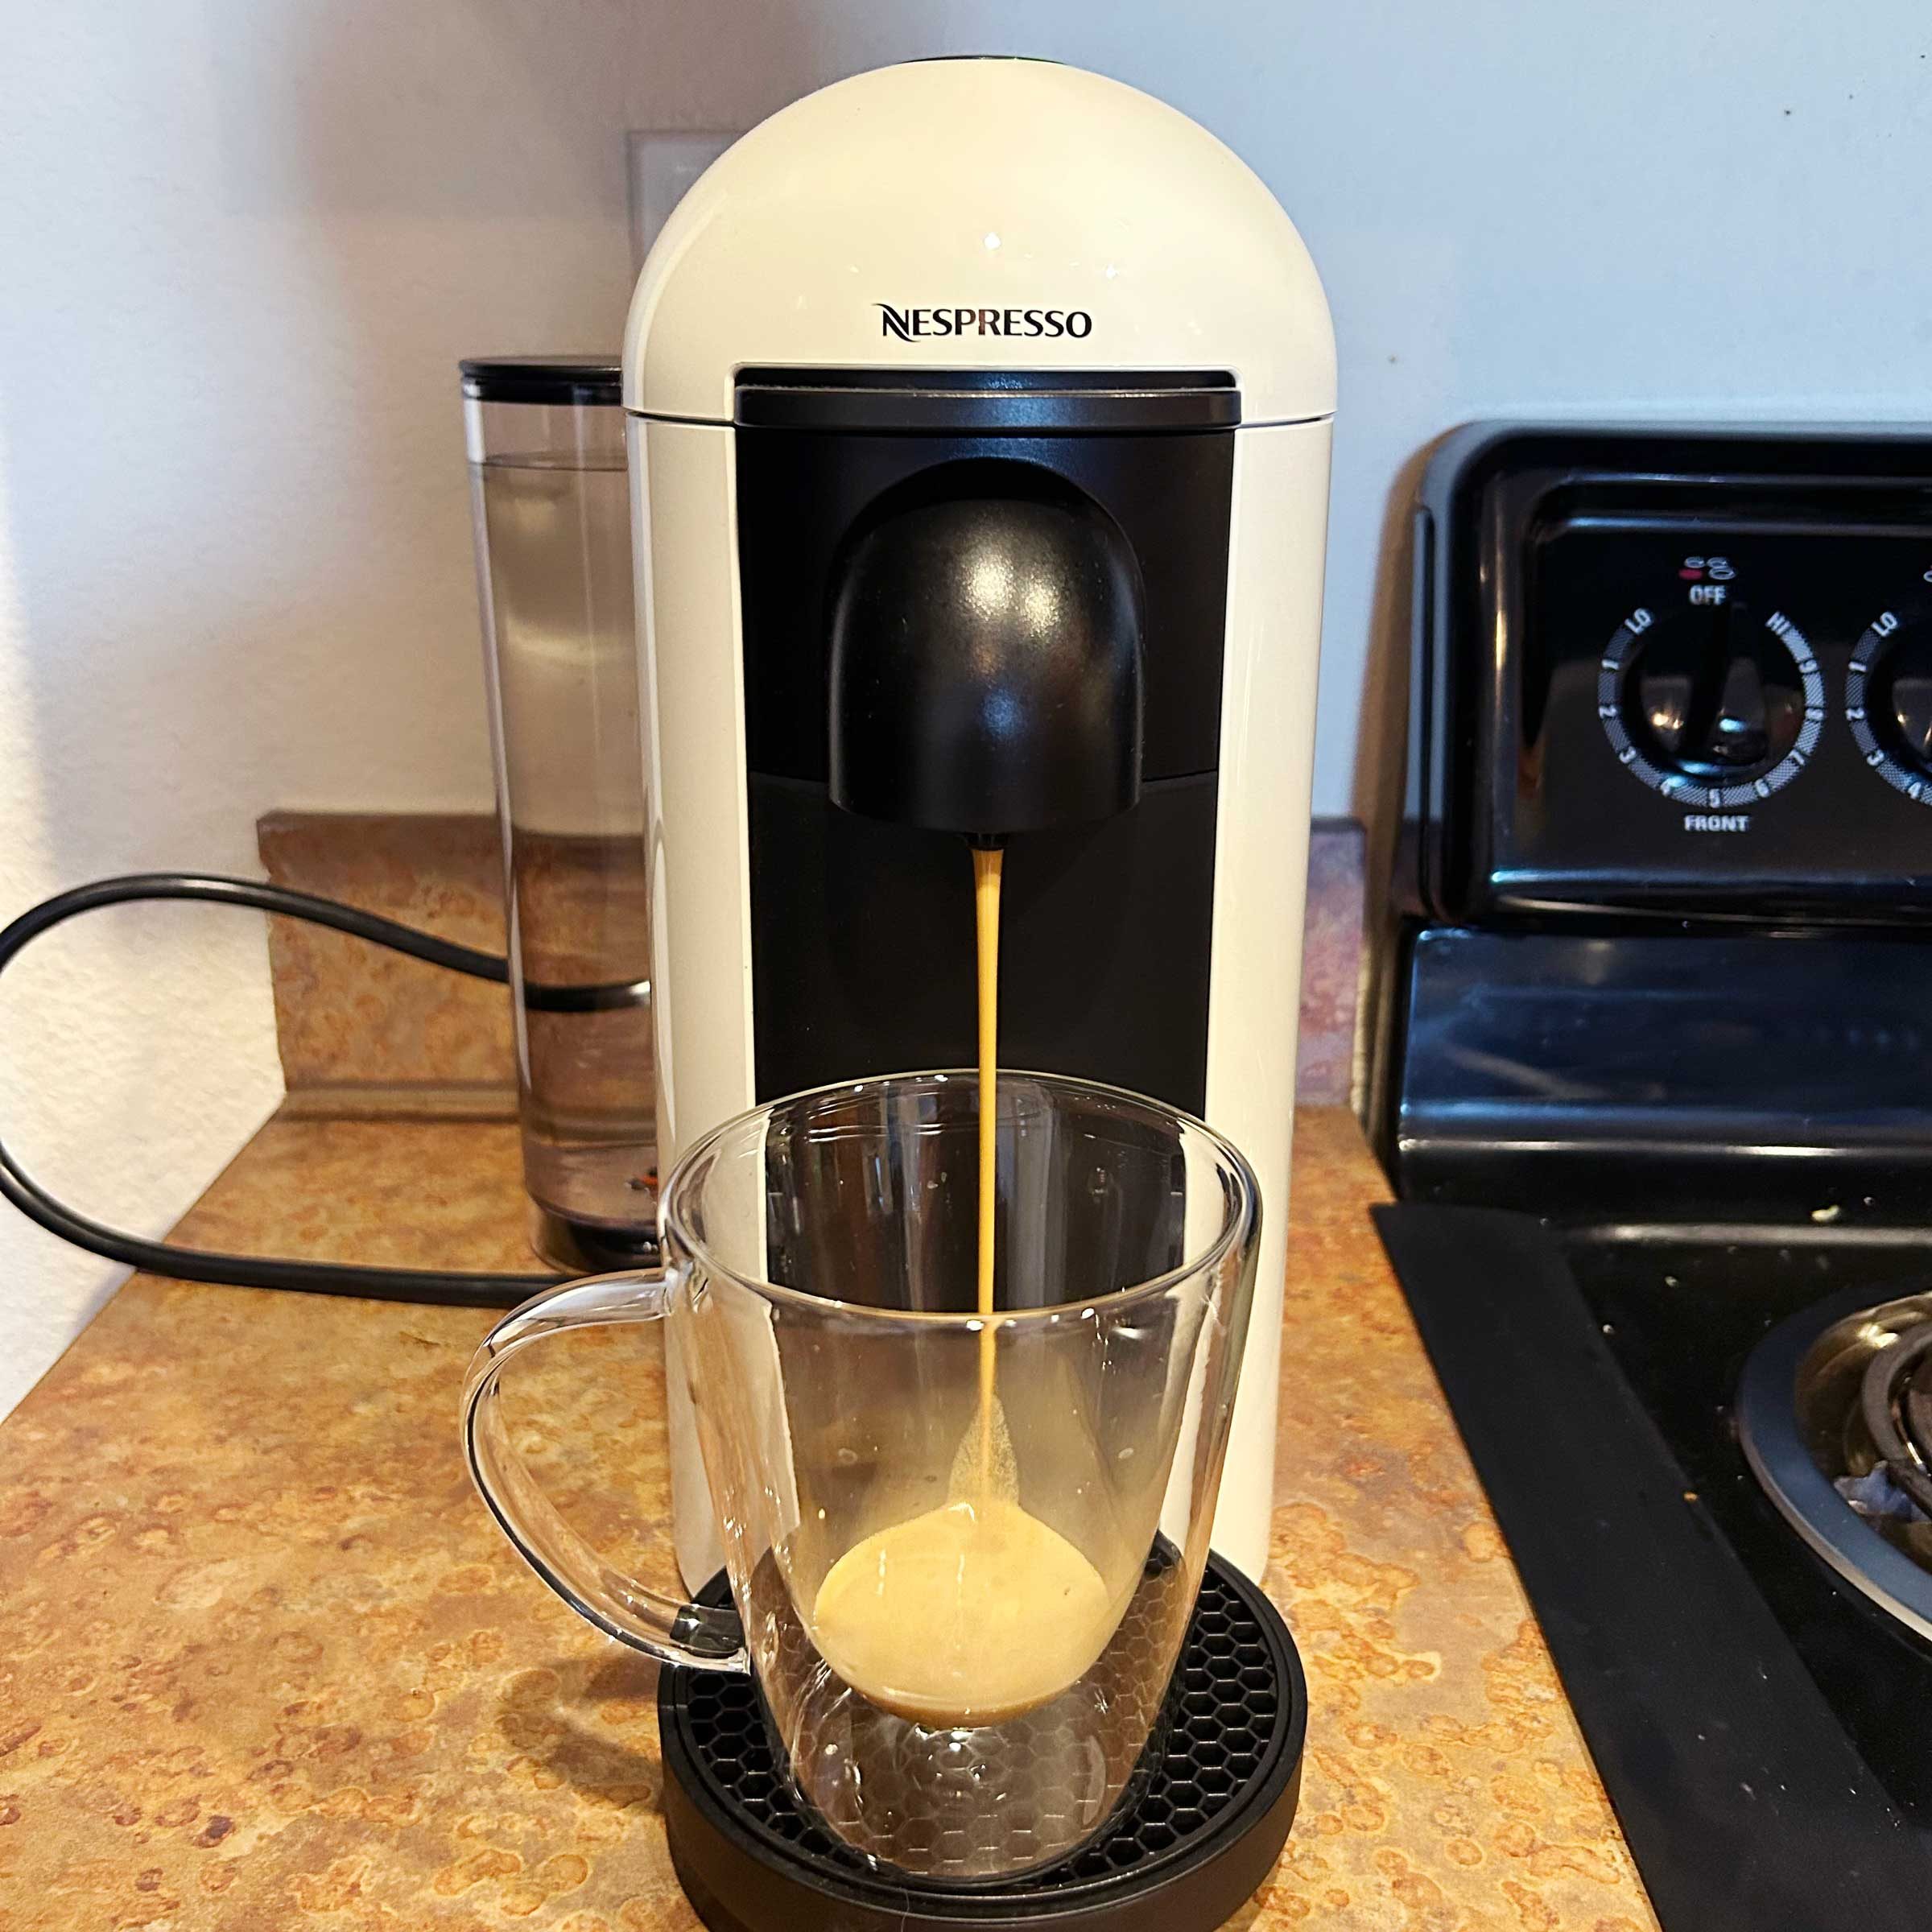 Safety Tip of the Week: Remember safety when using coffee makers